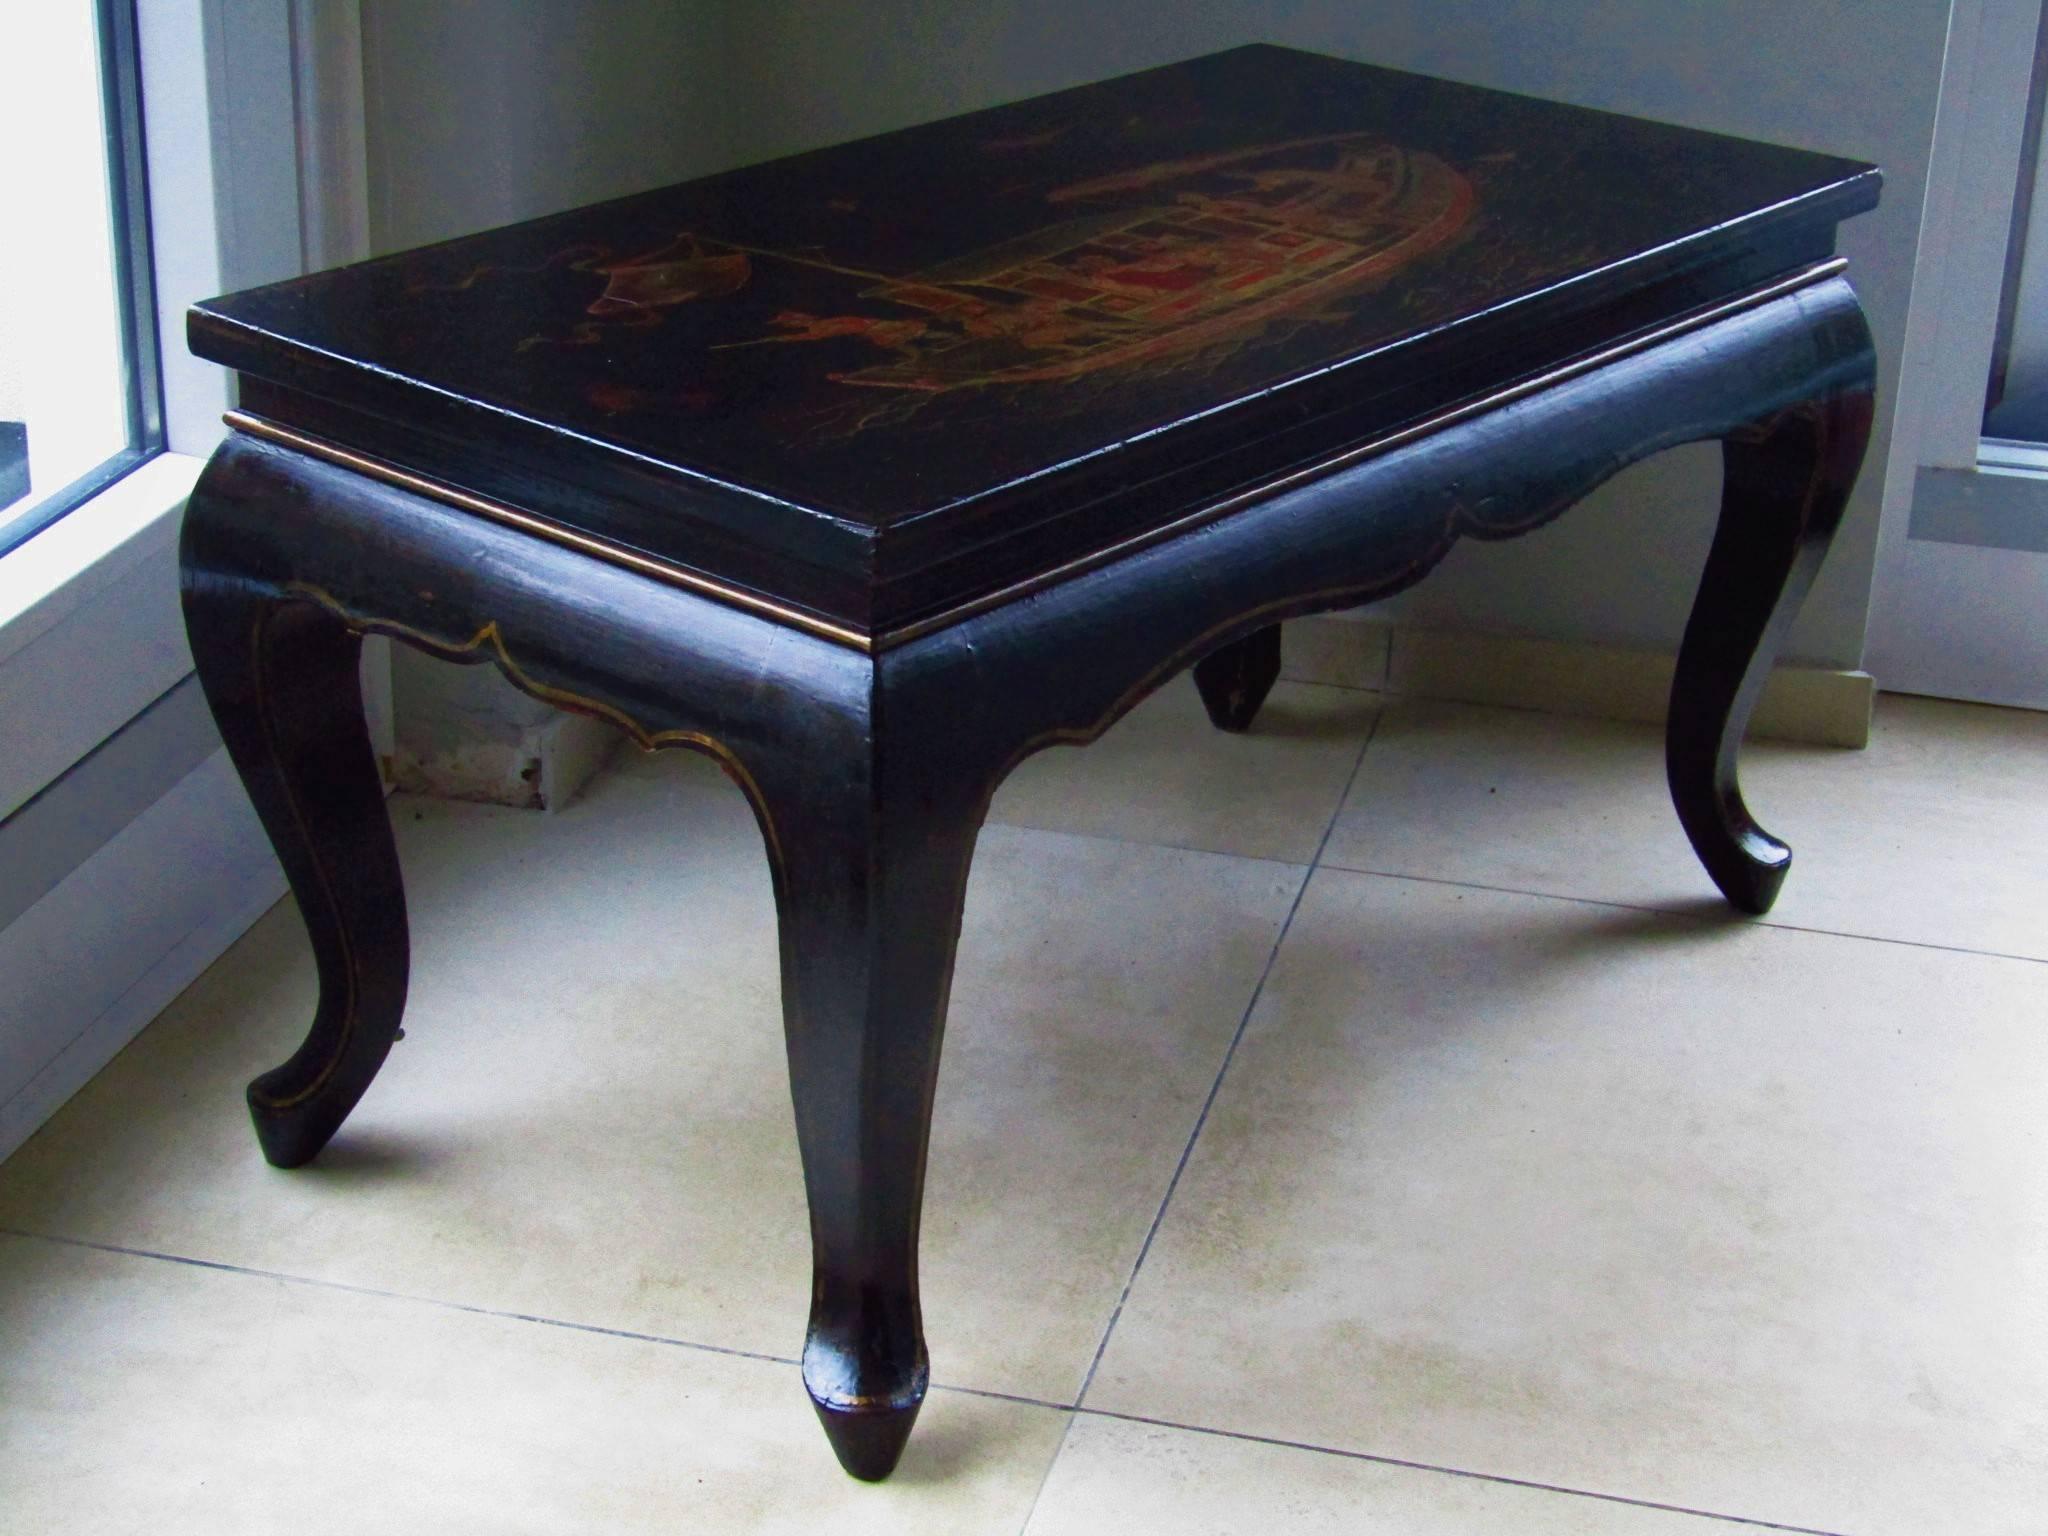 Art Deco coffee Opium table. Hand-painted Chinese decor, France, 1920s. Lacquer in good original condition. Table solid and stabile. 

Note: Very nice symmetric all-over patina of the lacquer!

We offer door to door shipping! please ask for your